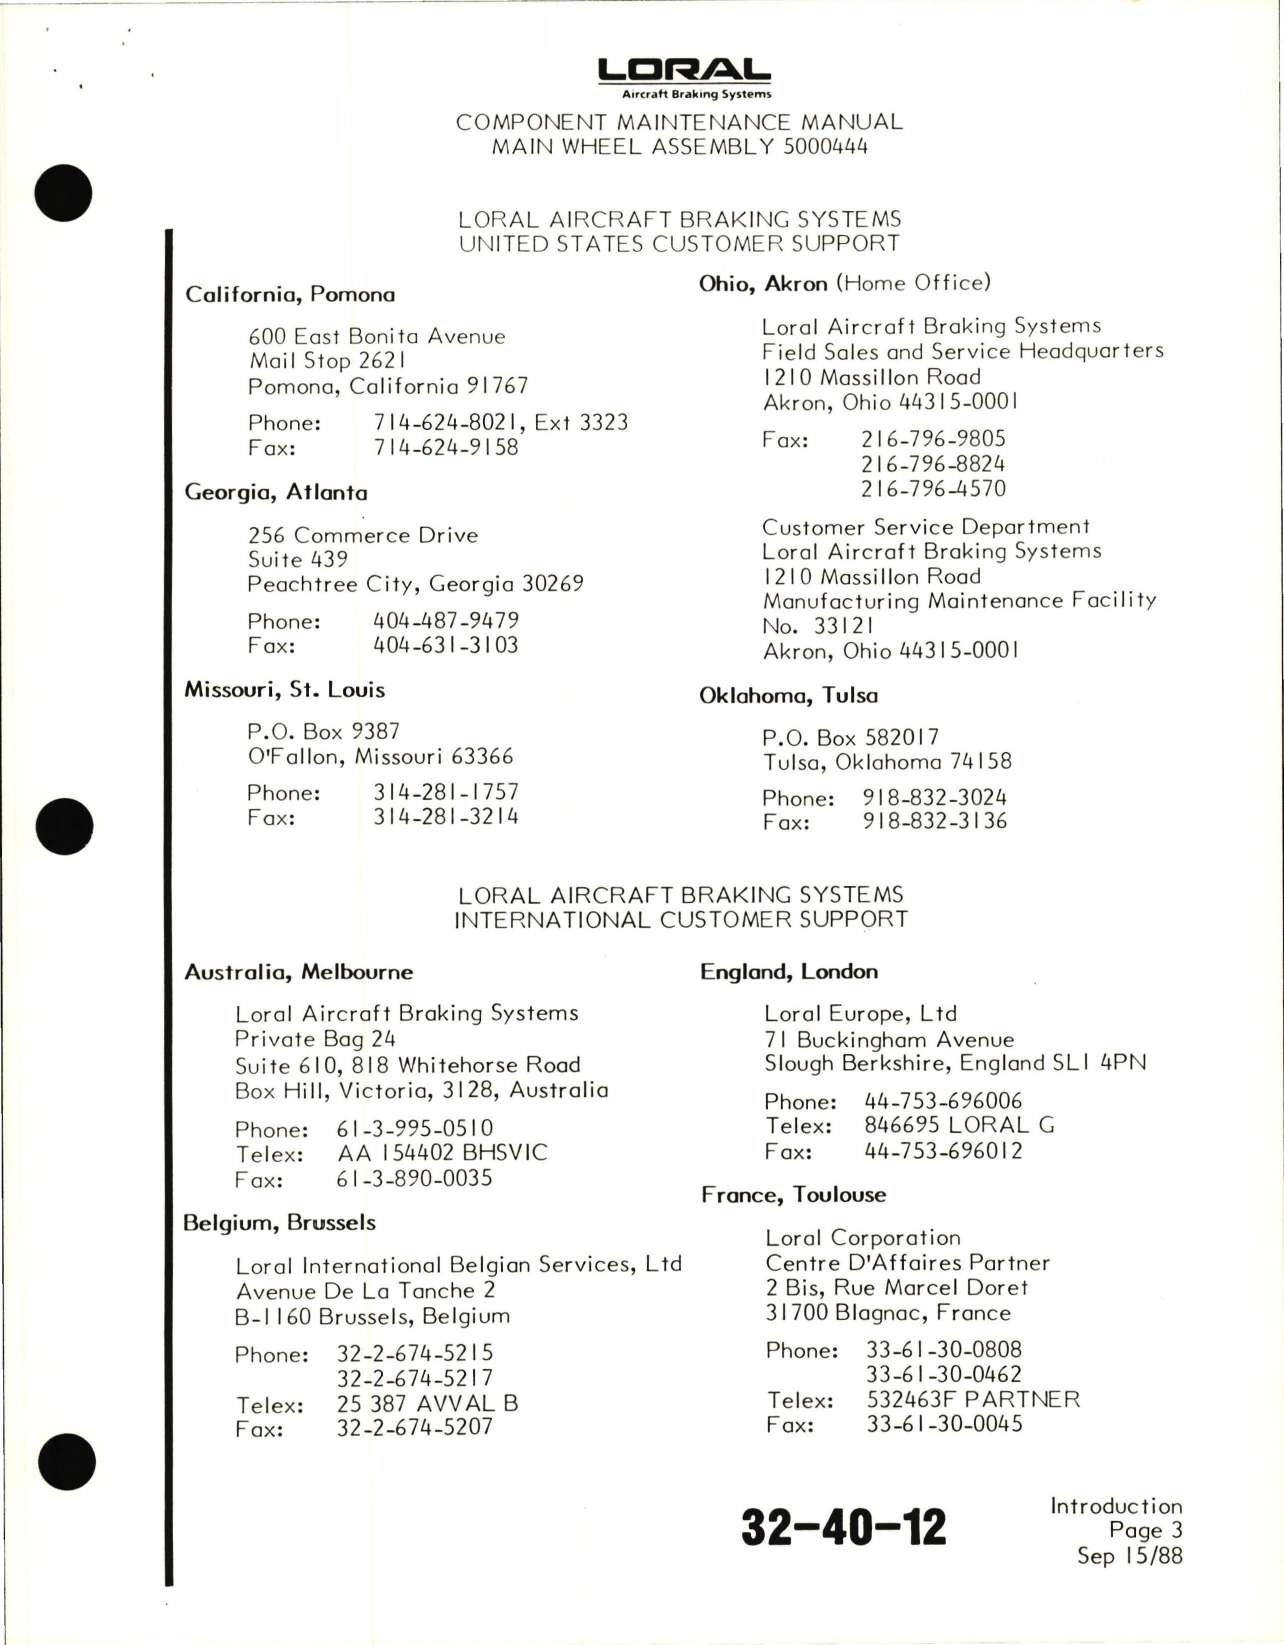 Sample page 7 from AirCorps Library document: Component Maintenance Manual AP-559 with Illustrated Parts List for Main Wheel Assembly 5000444, 5000444-3, and 5000444-1